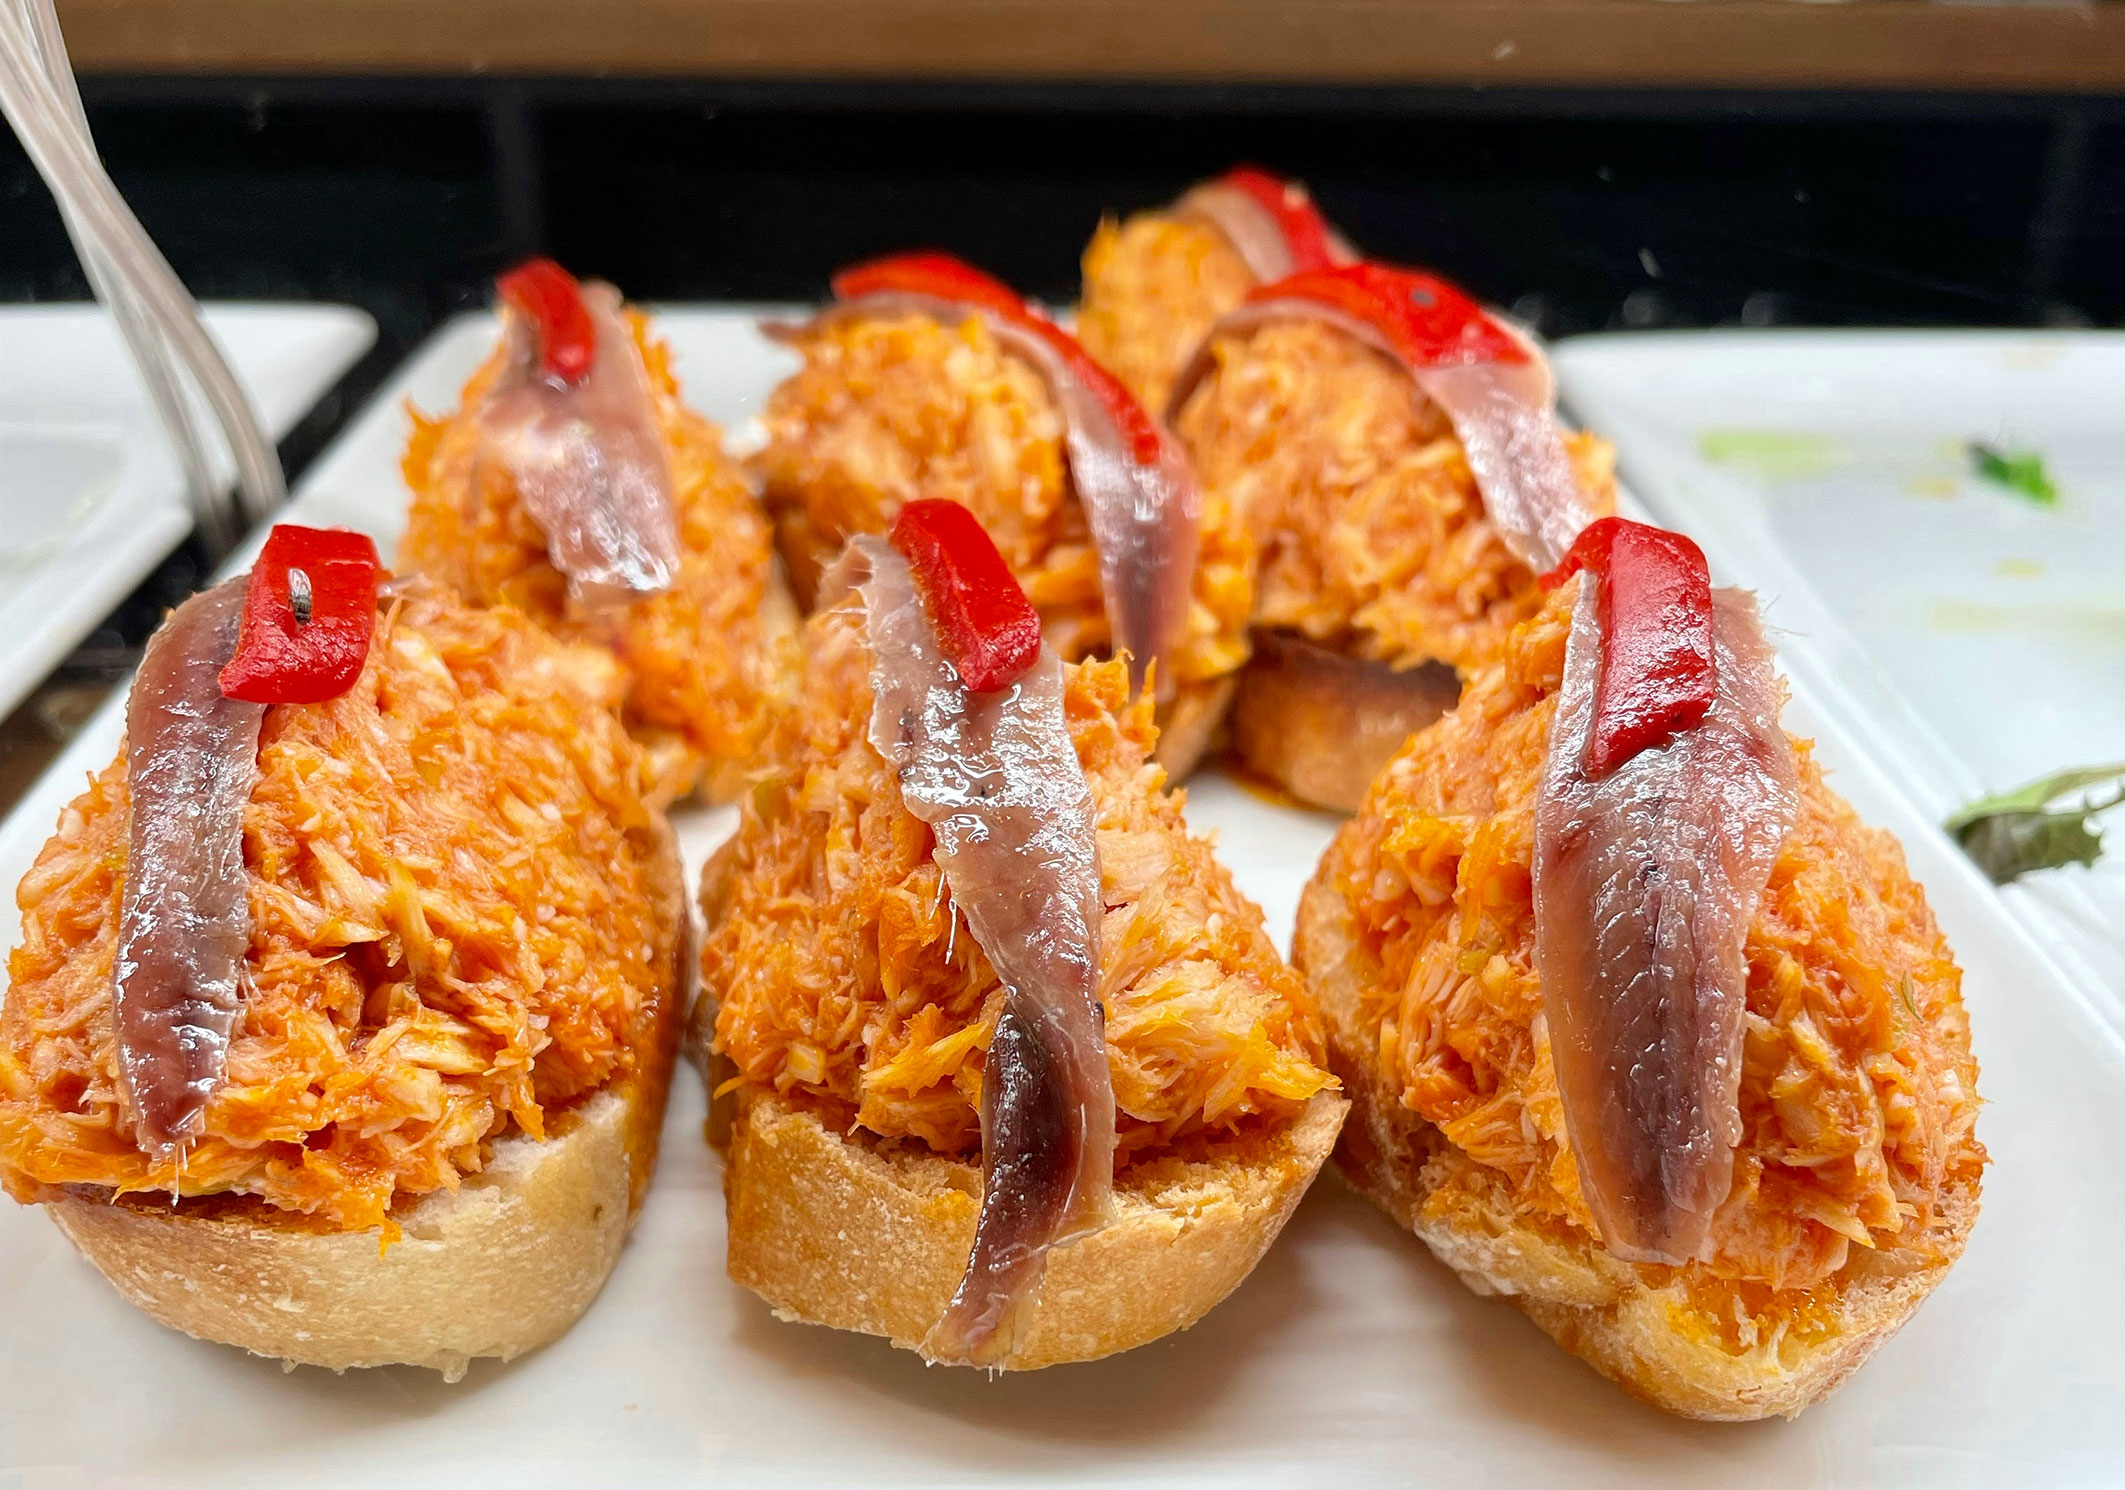 Enjoy great pintxos while in Bilbao | by CÚRATE Trips